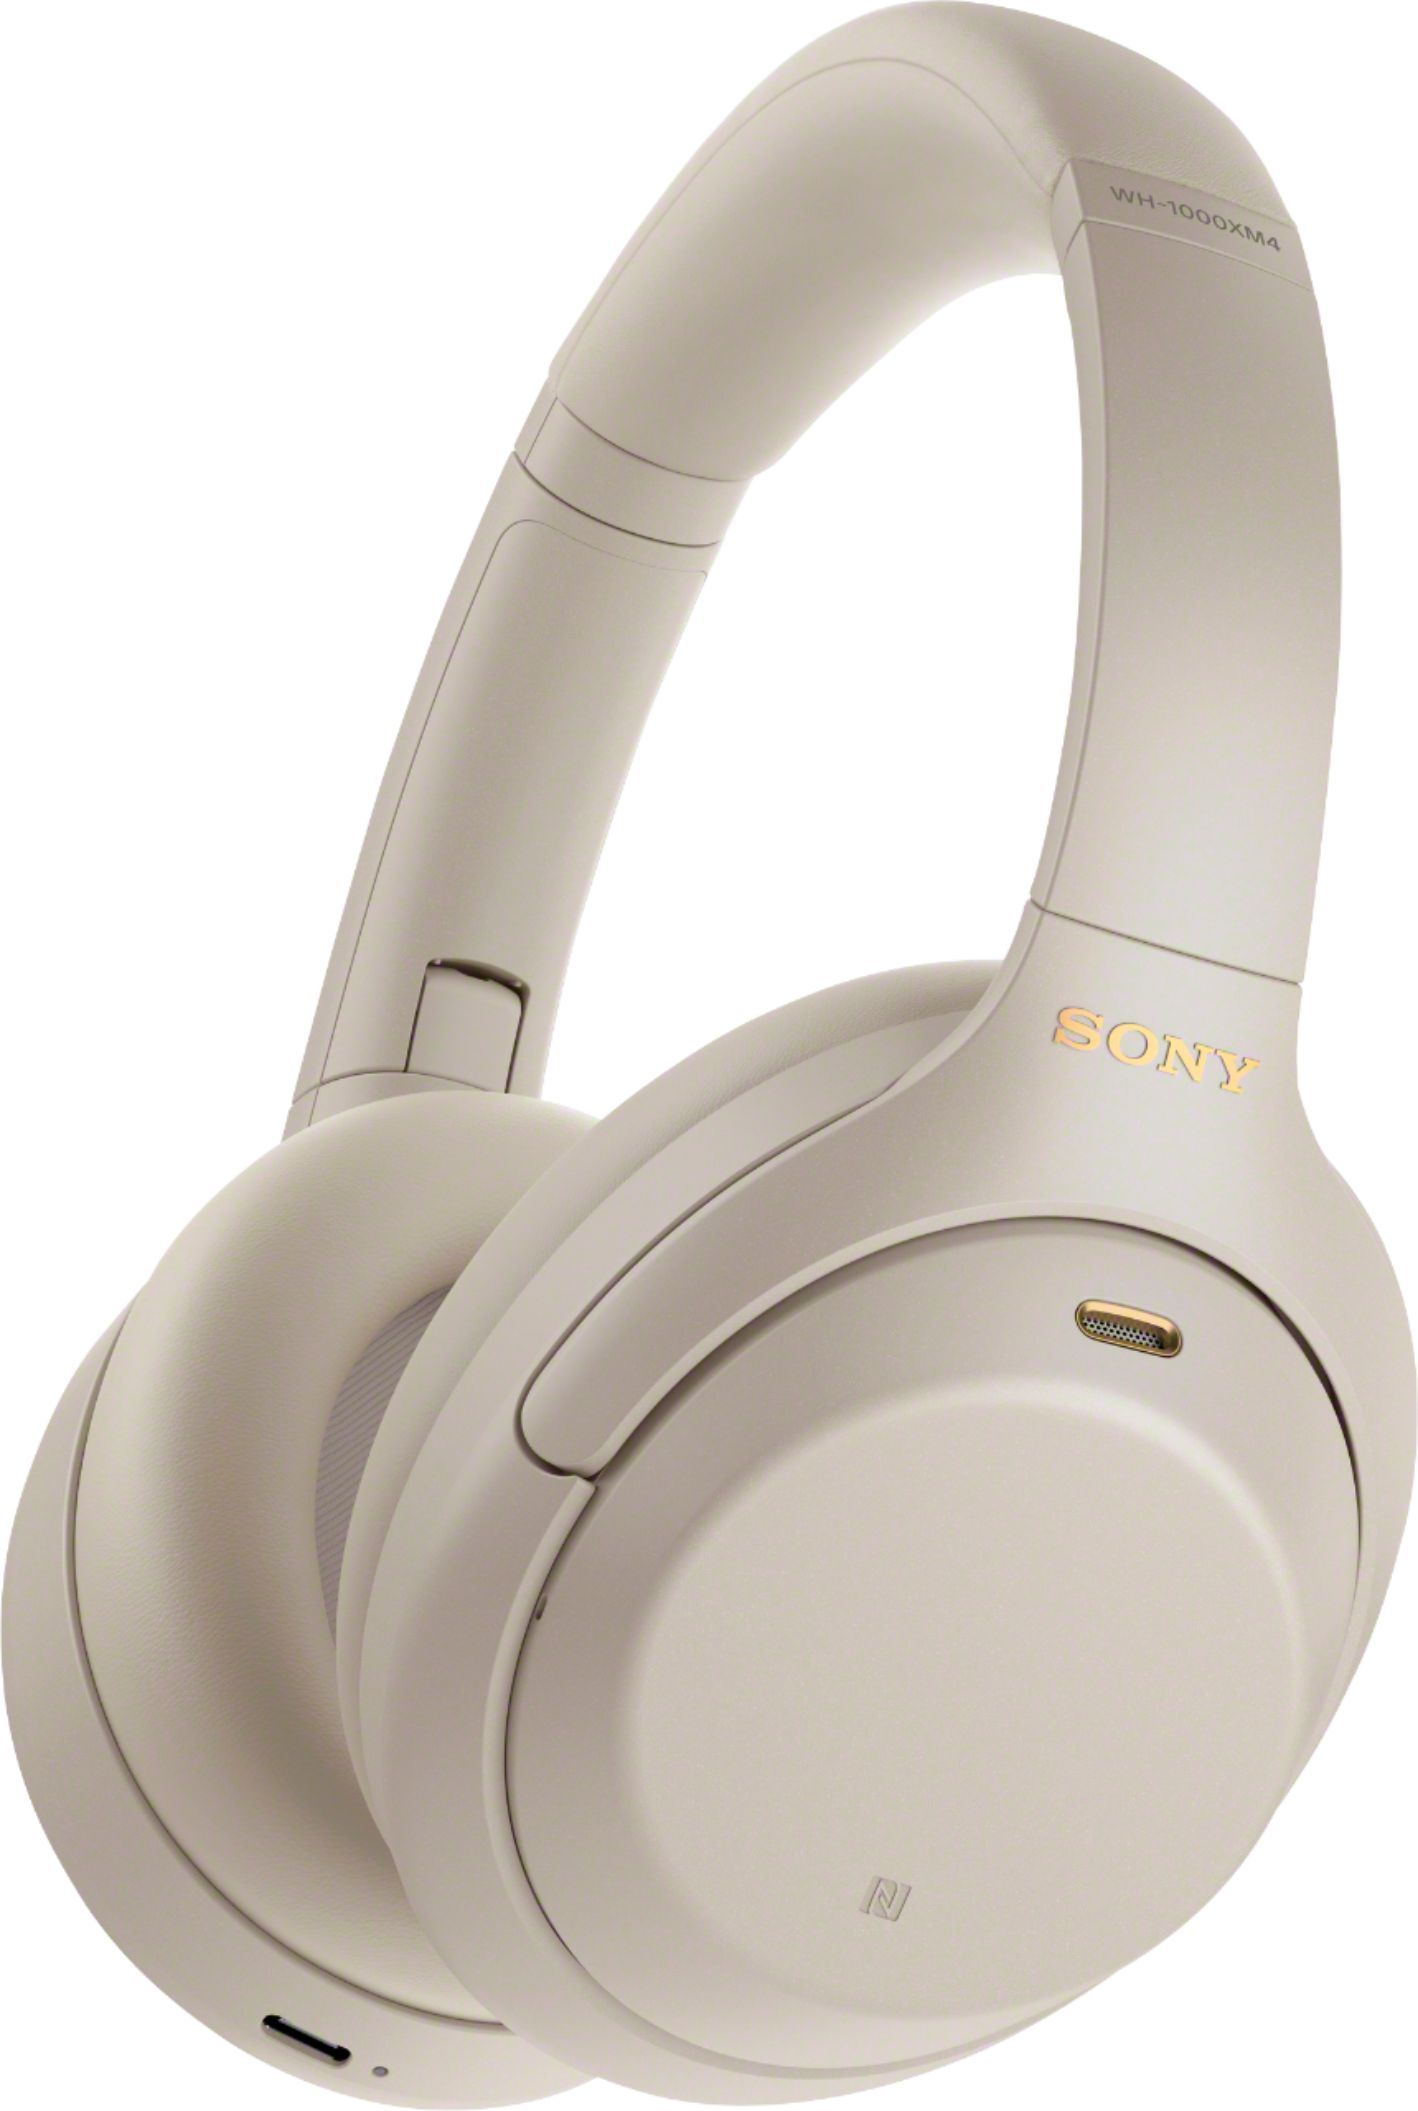 Sony WH1000XM4 Wireless Noise-Cancelling Over-the-Ear Headphones Silver WH1000XM4/S - Best Buy | Best Buy U.S.